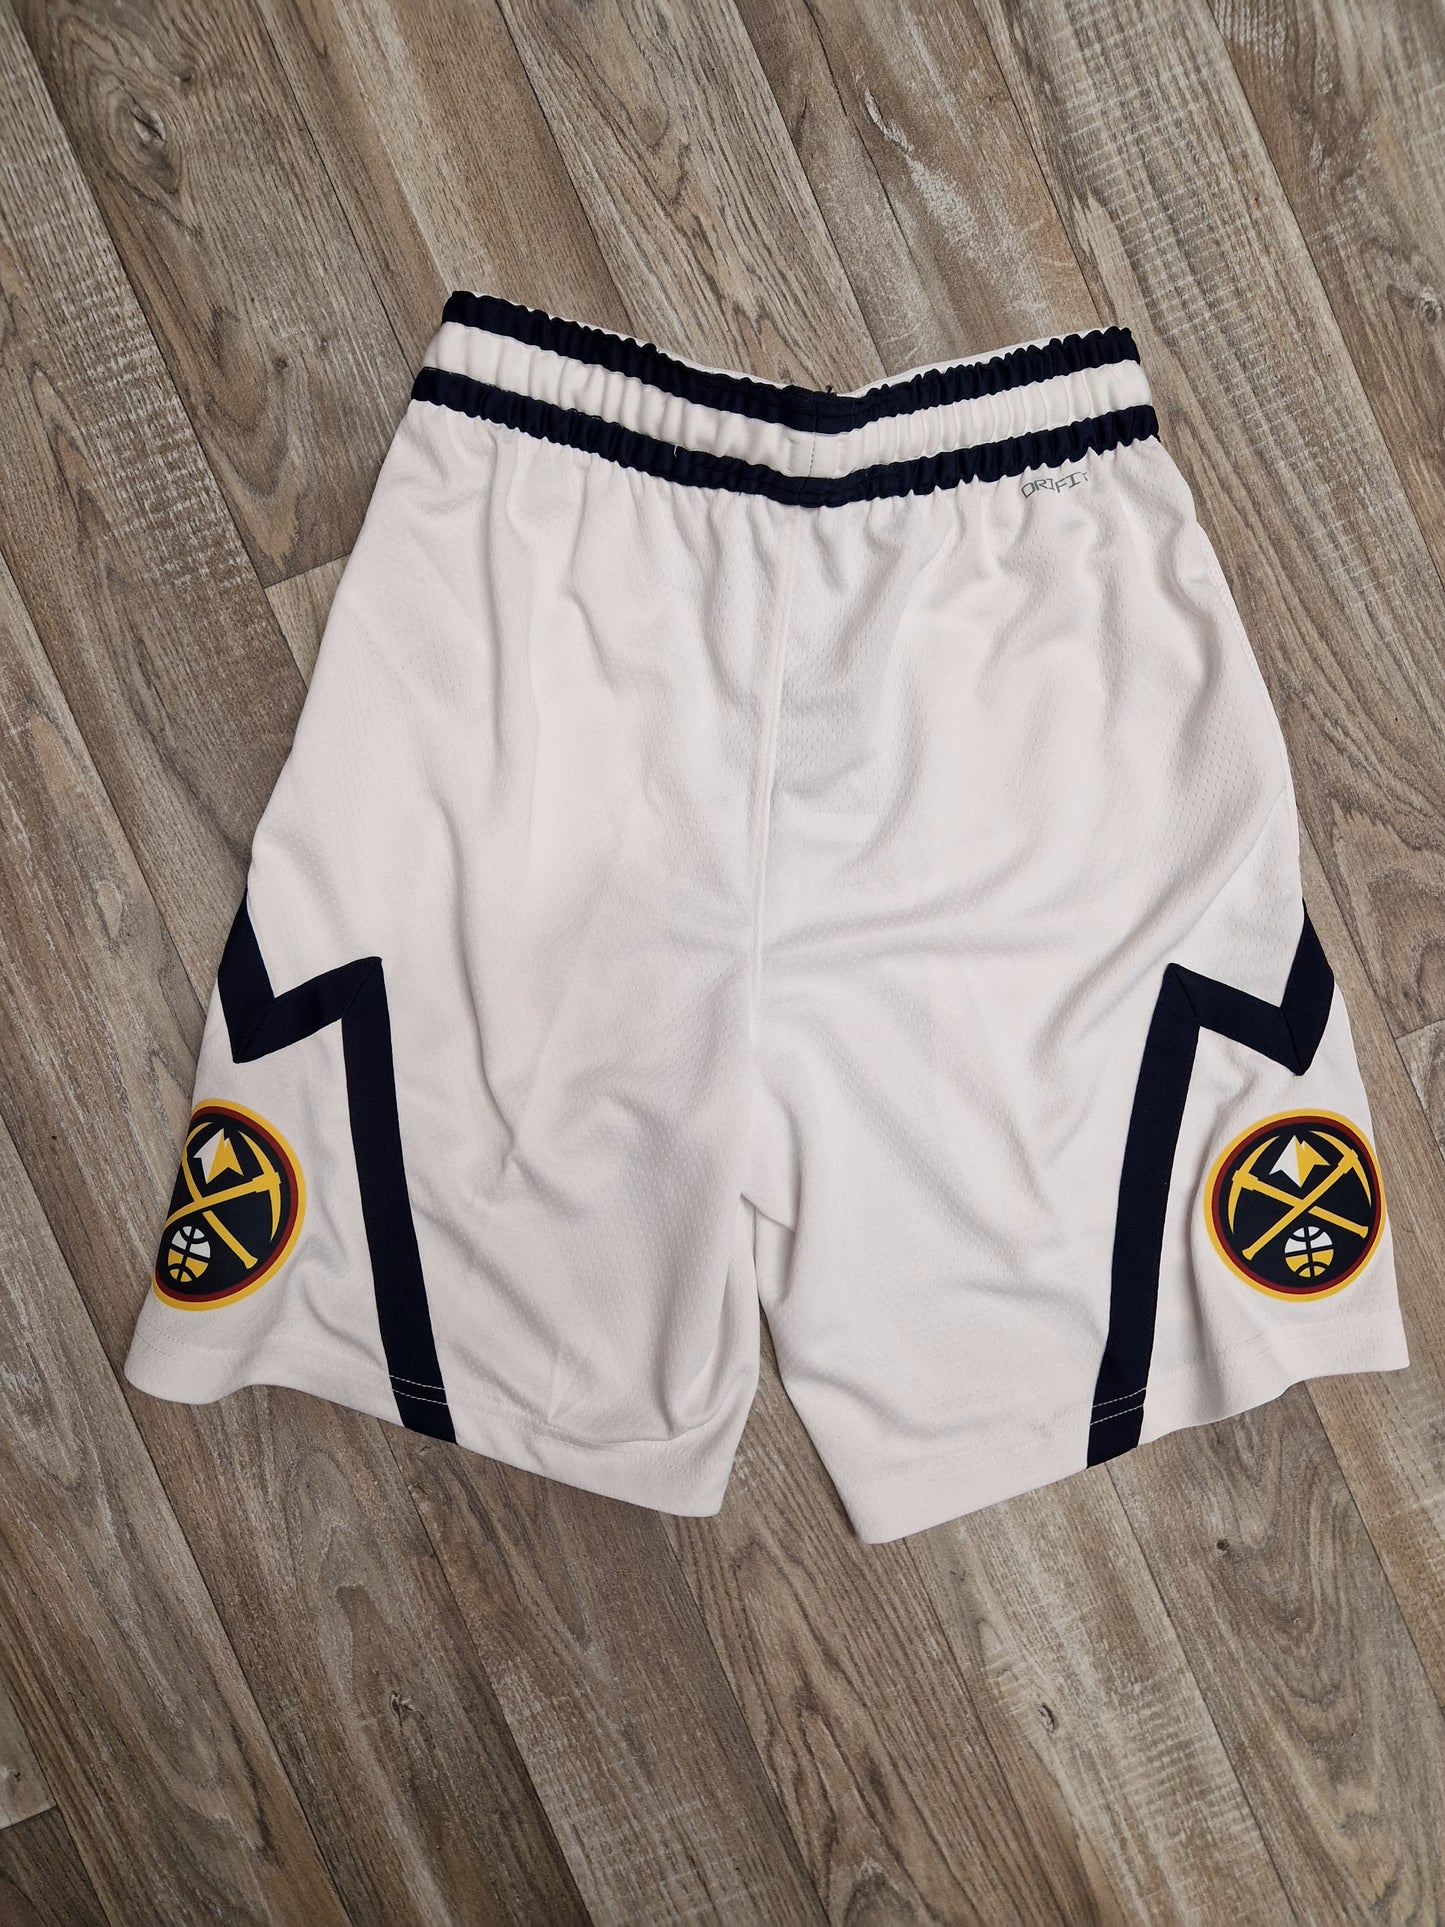 Denver Nuggets Shorts Size Small